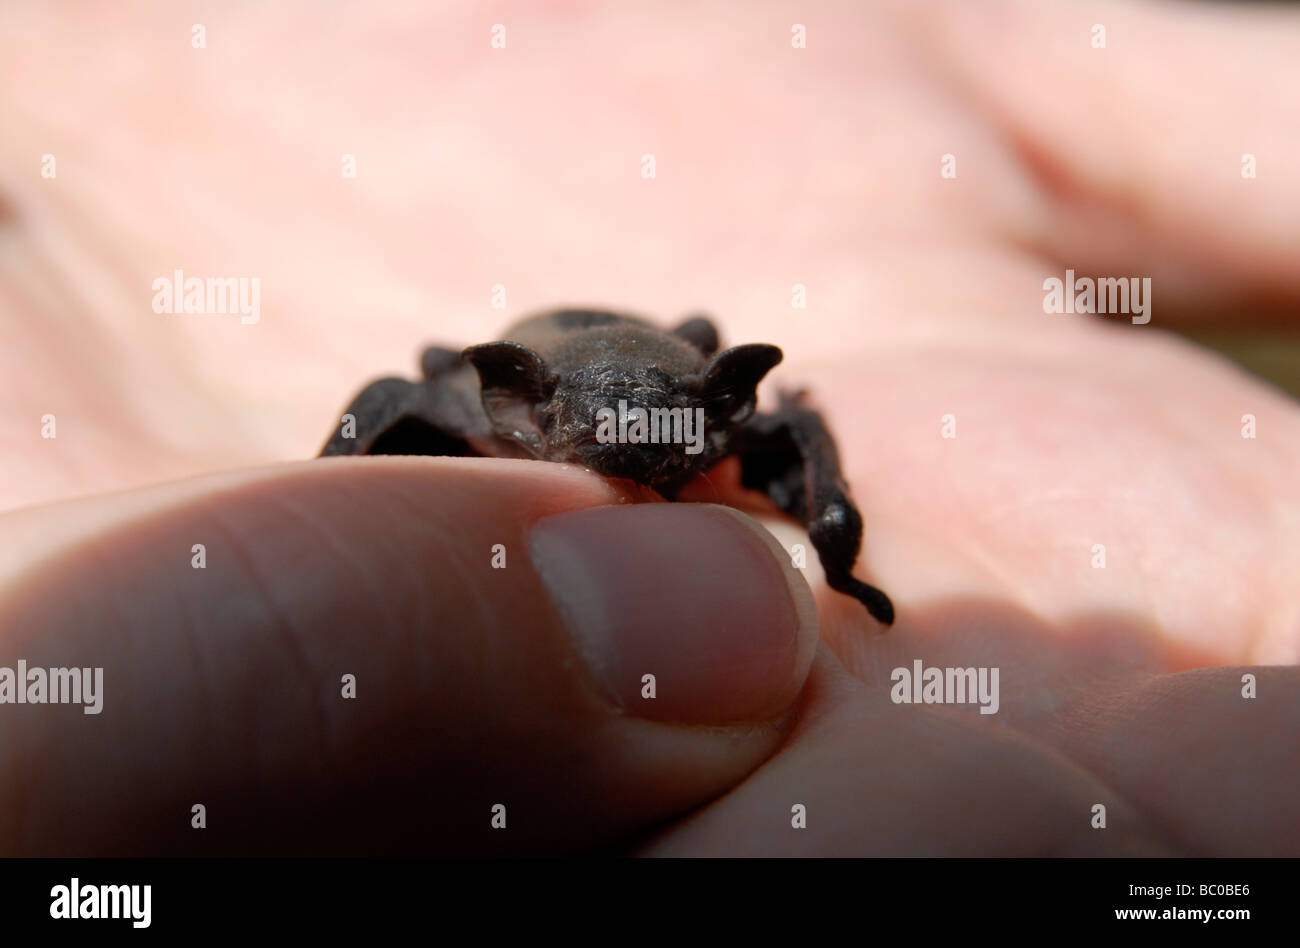 A bat (common pipistrelle), about one week old, sitting on a hand Stock Photo